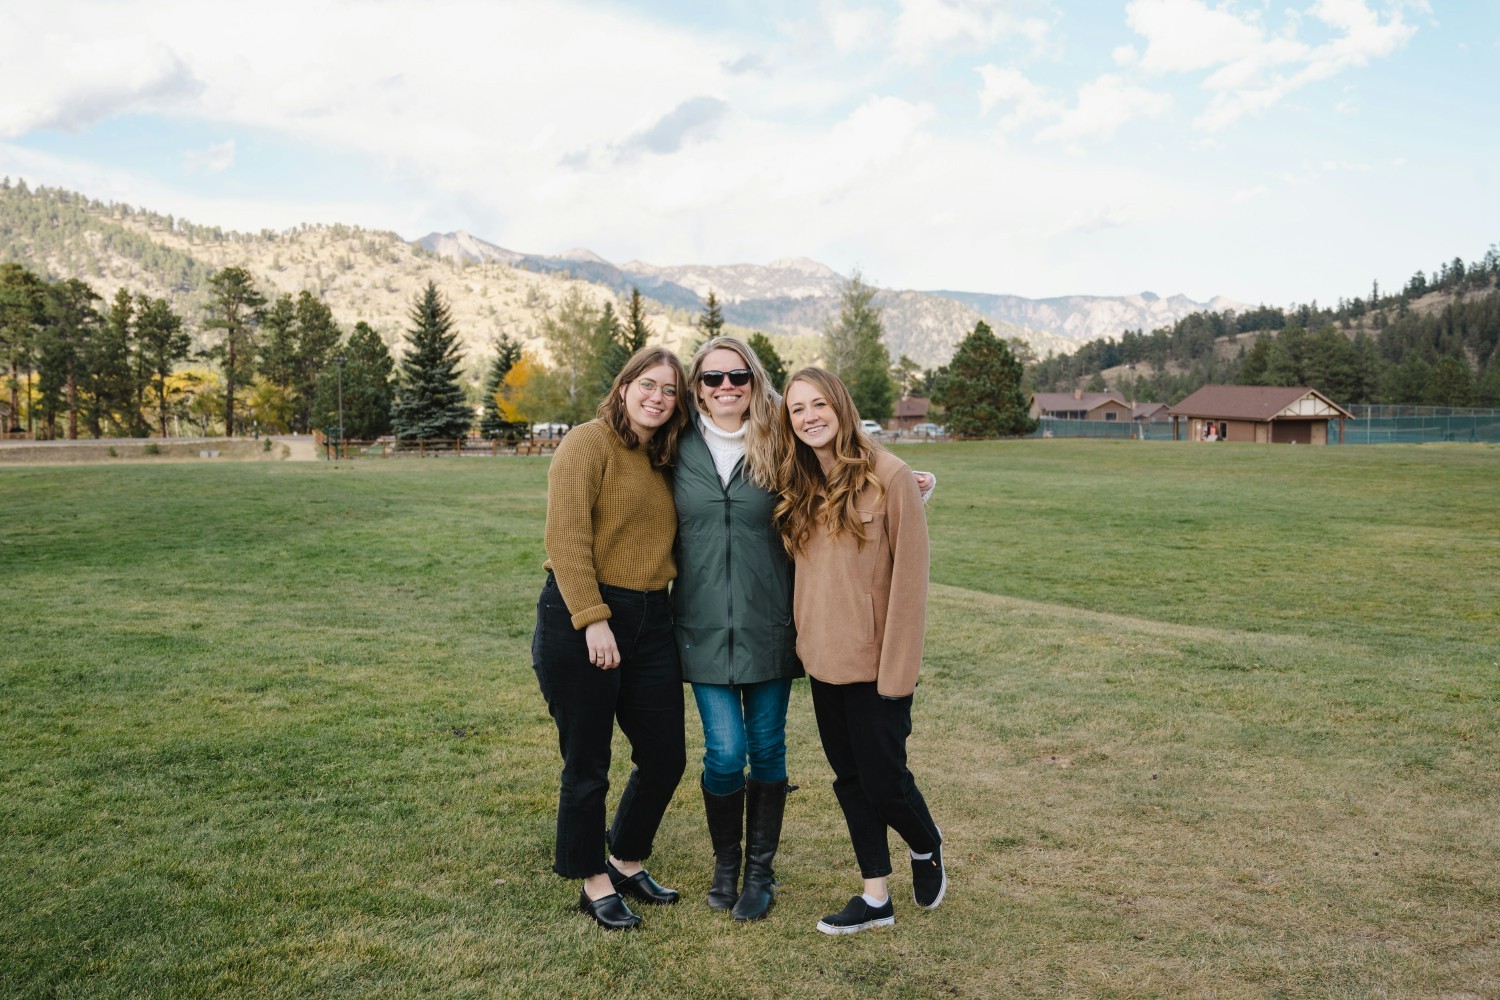 Taking a break at our company retreat in the beautiful mountains of Estes Park, Colorado.